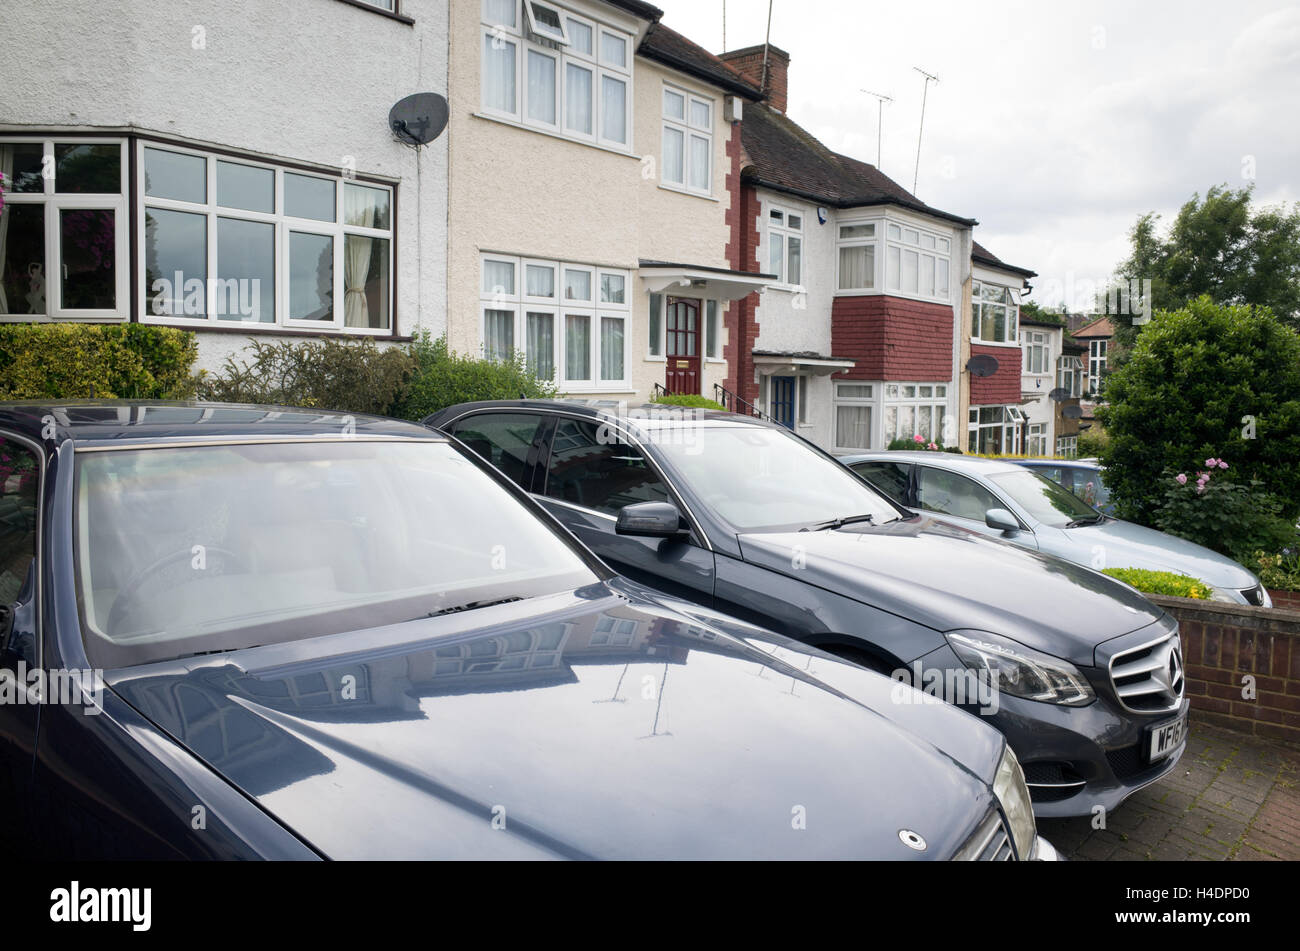 Cars parked on the front drive of houses in Barnet, North London, England, UK Stock Photo